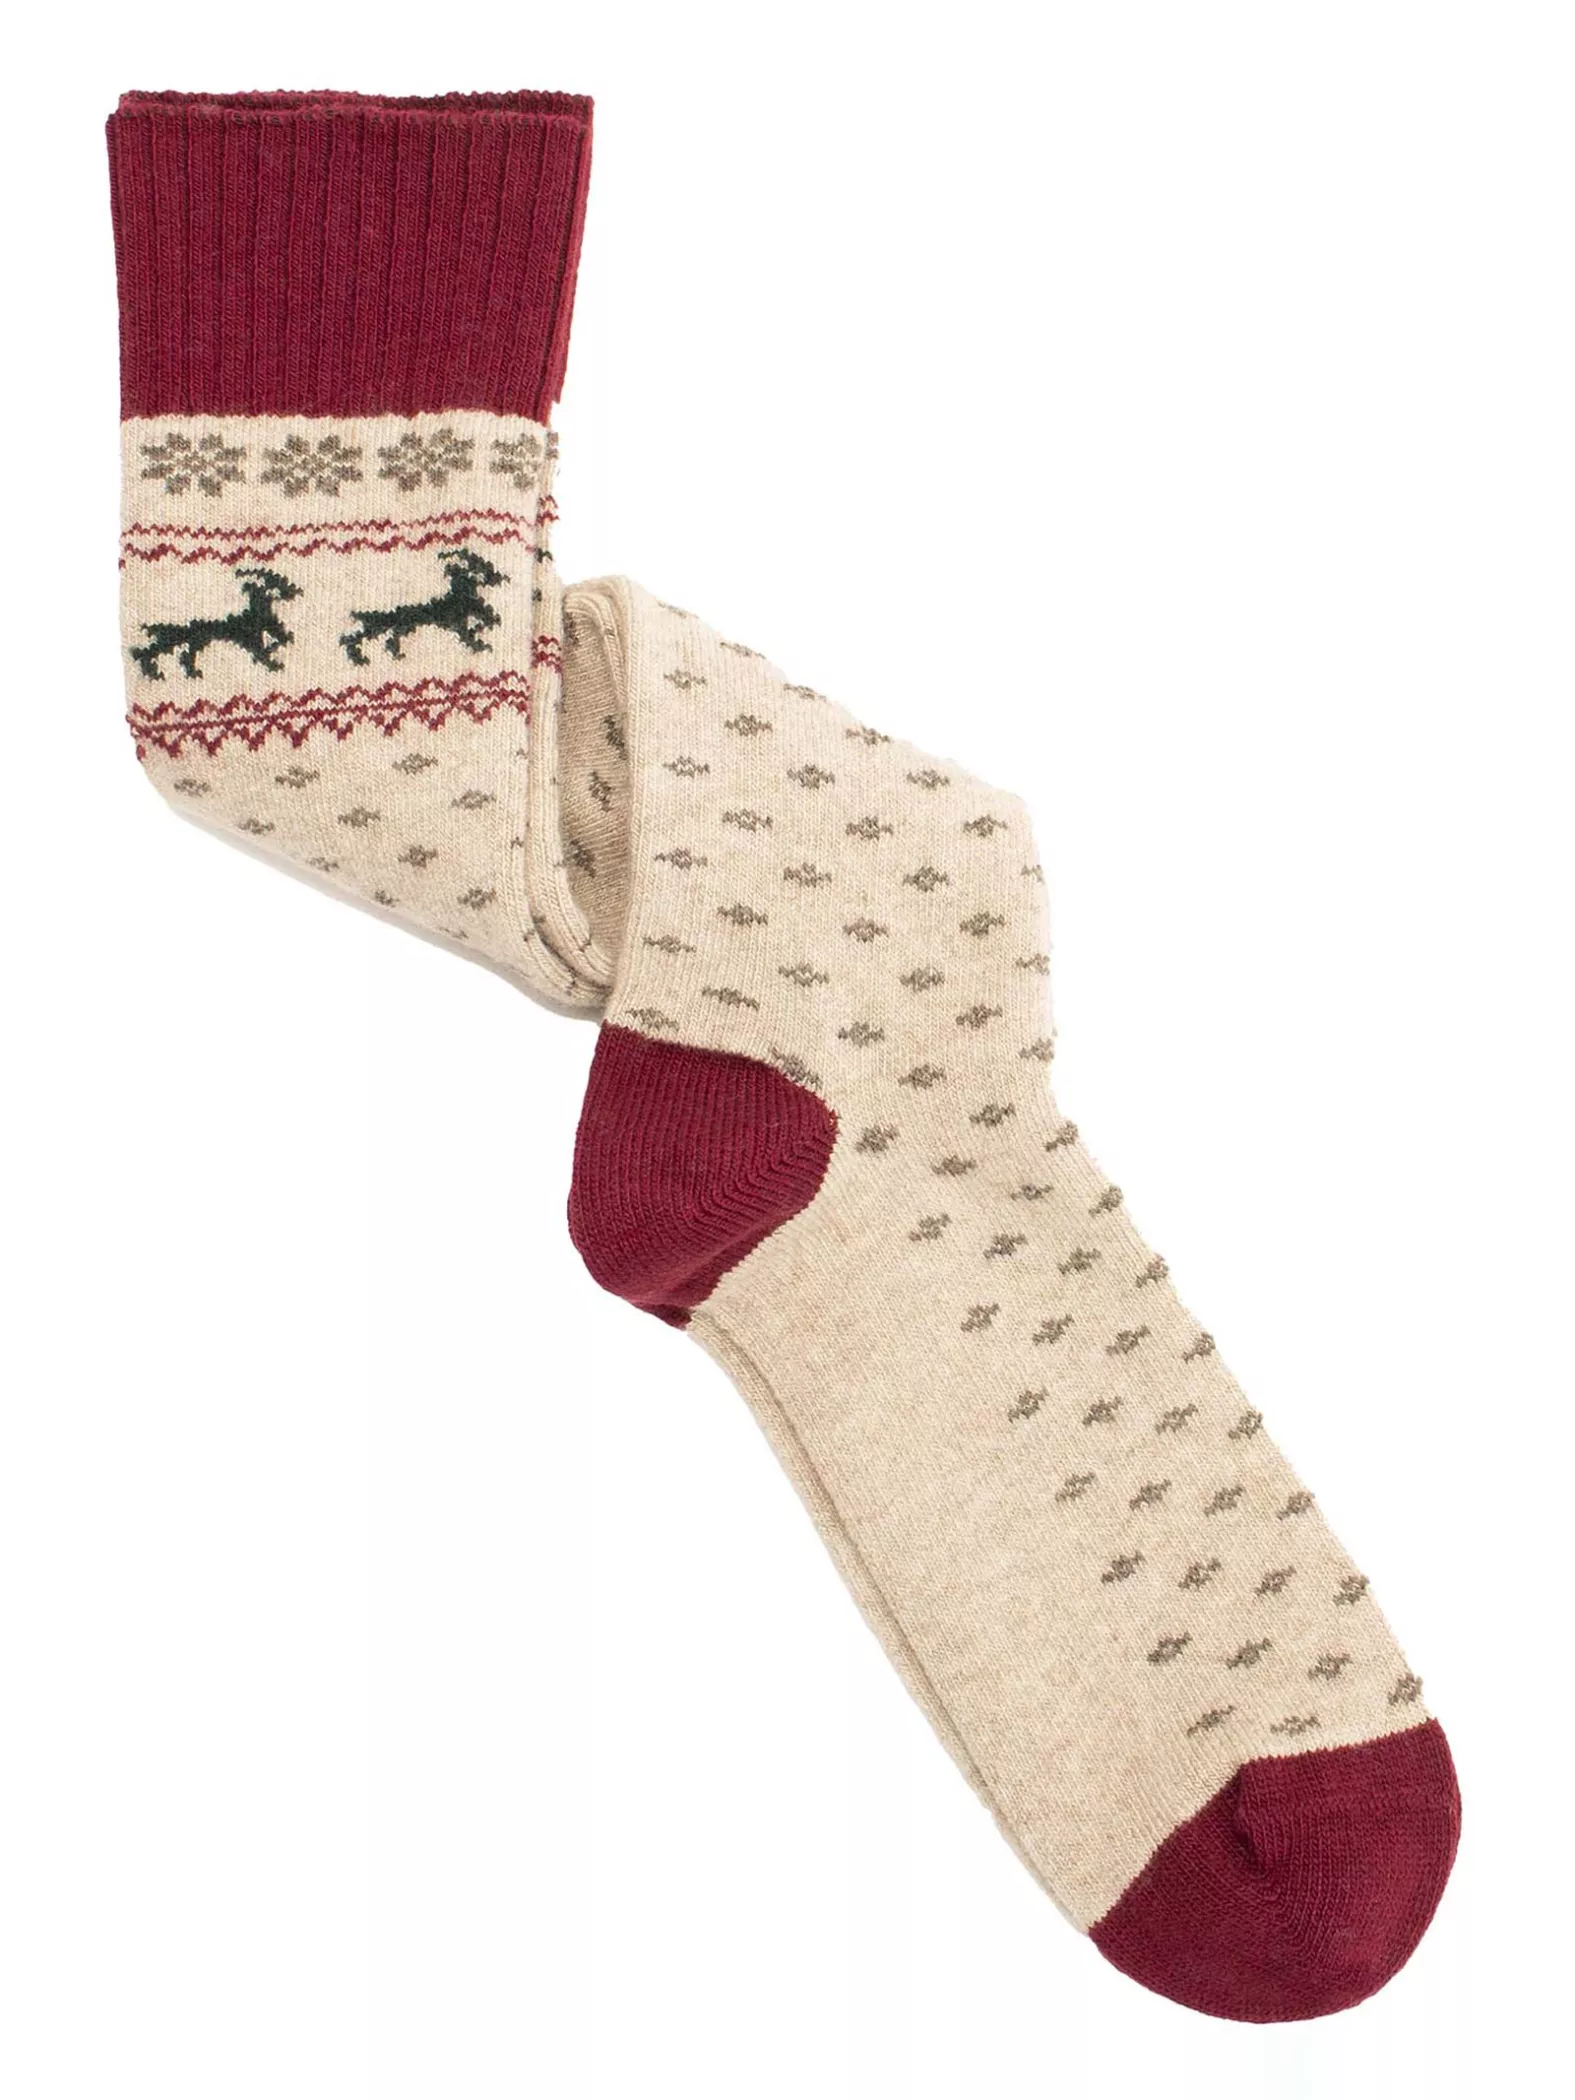 Men's long Cashmere socks with Ibex pattern